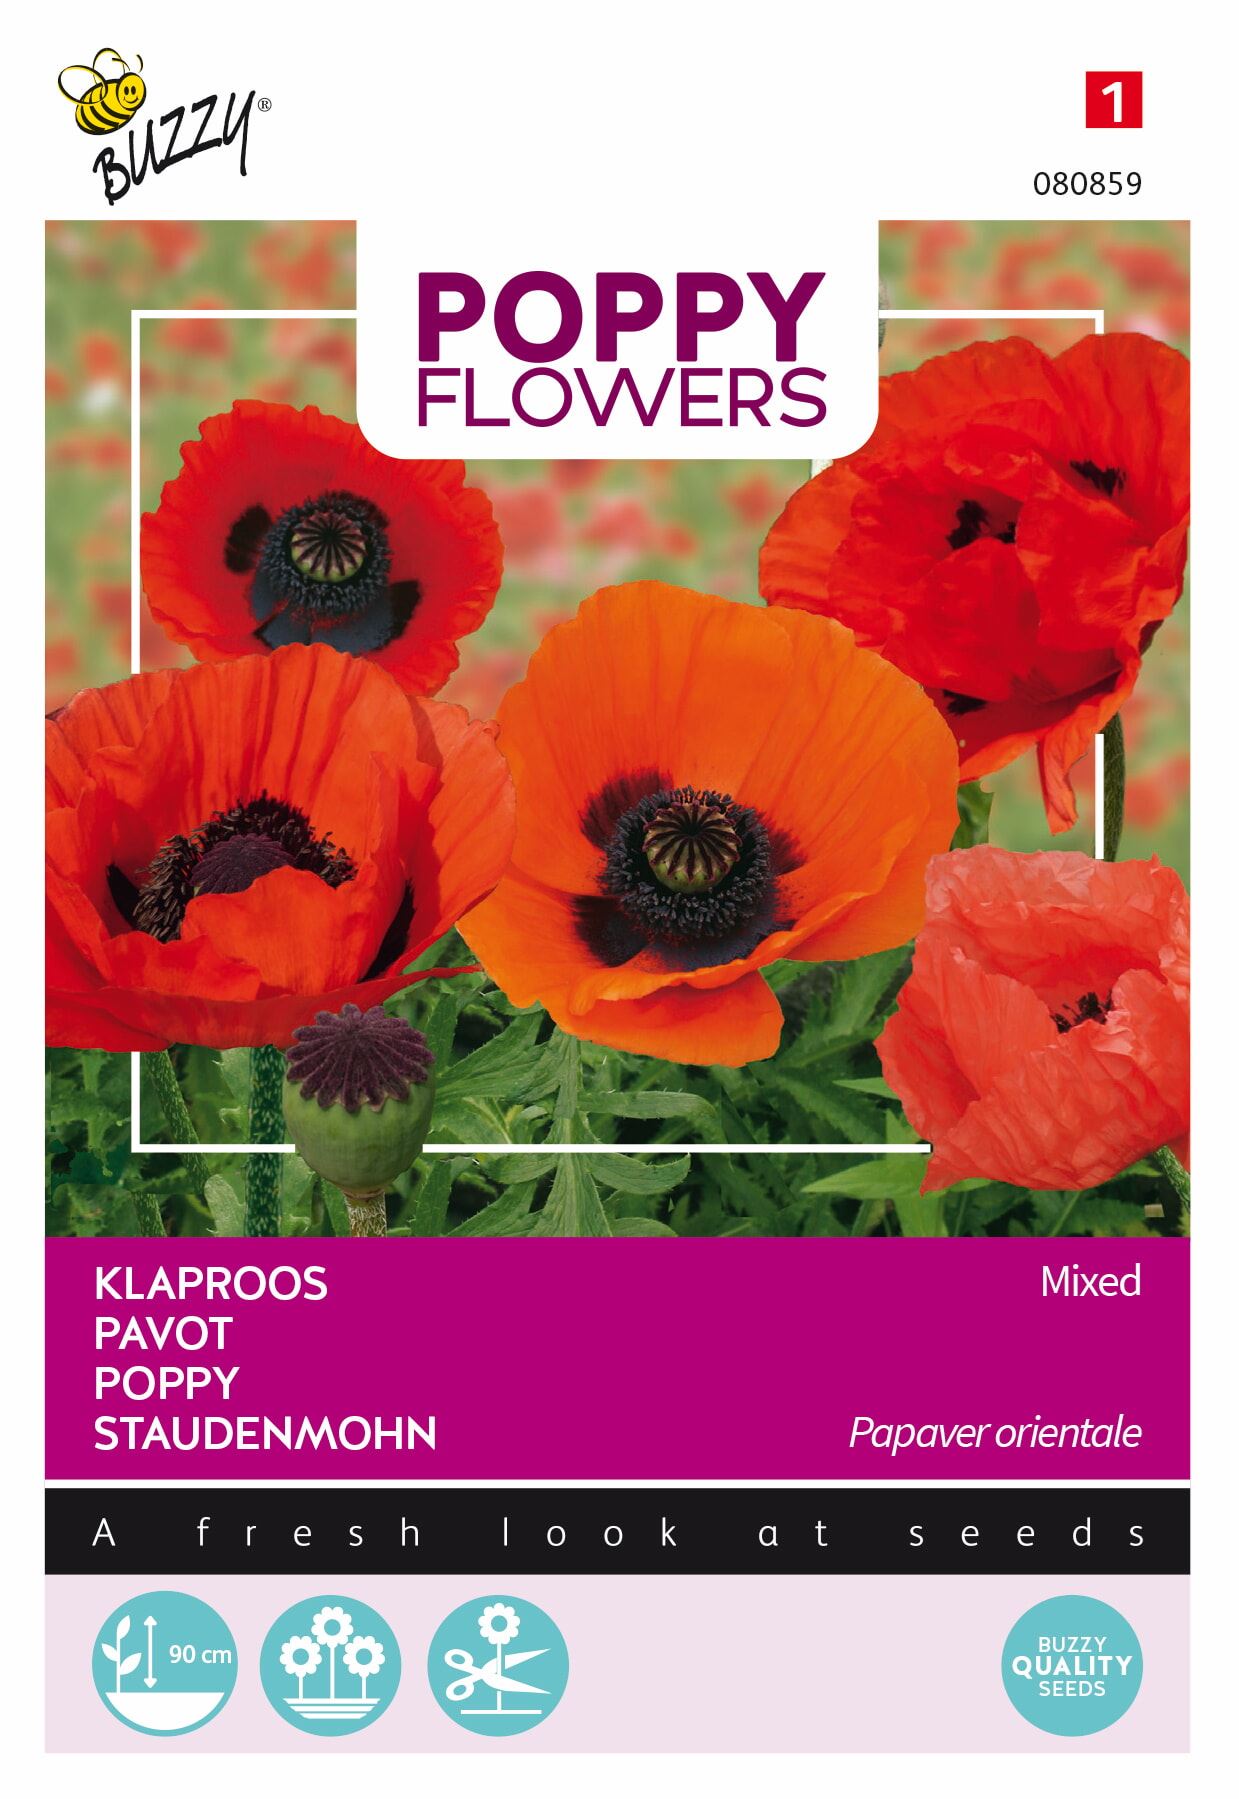 Buzzy-Poppies-of-the-world-Orientaalse-papaver